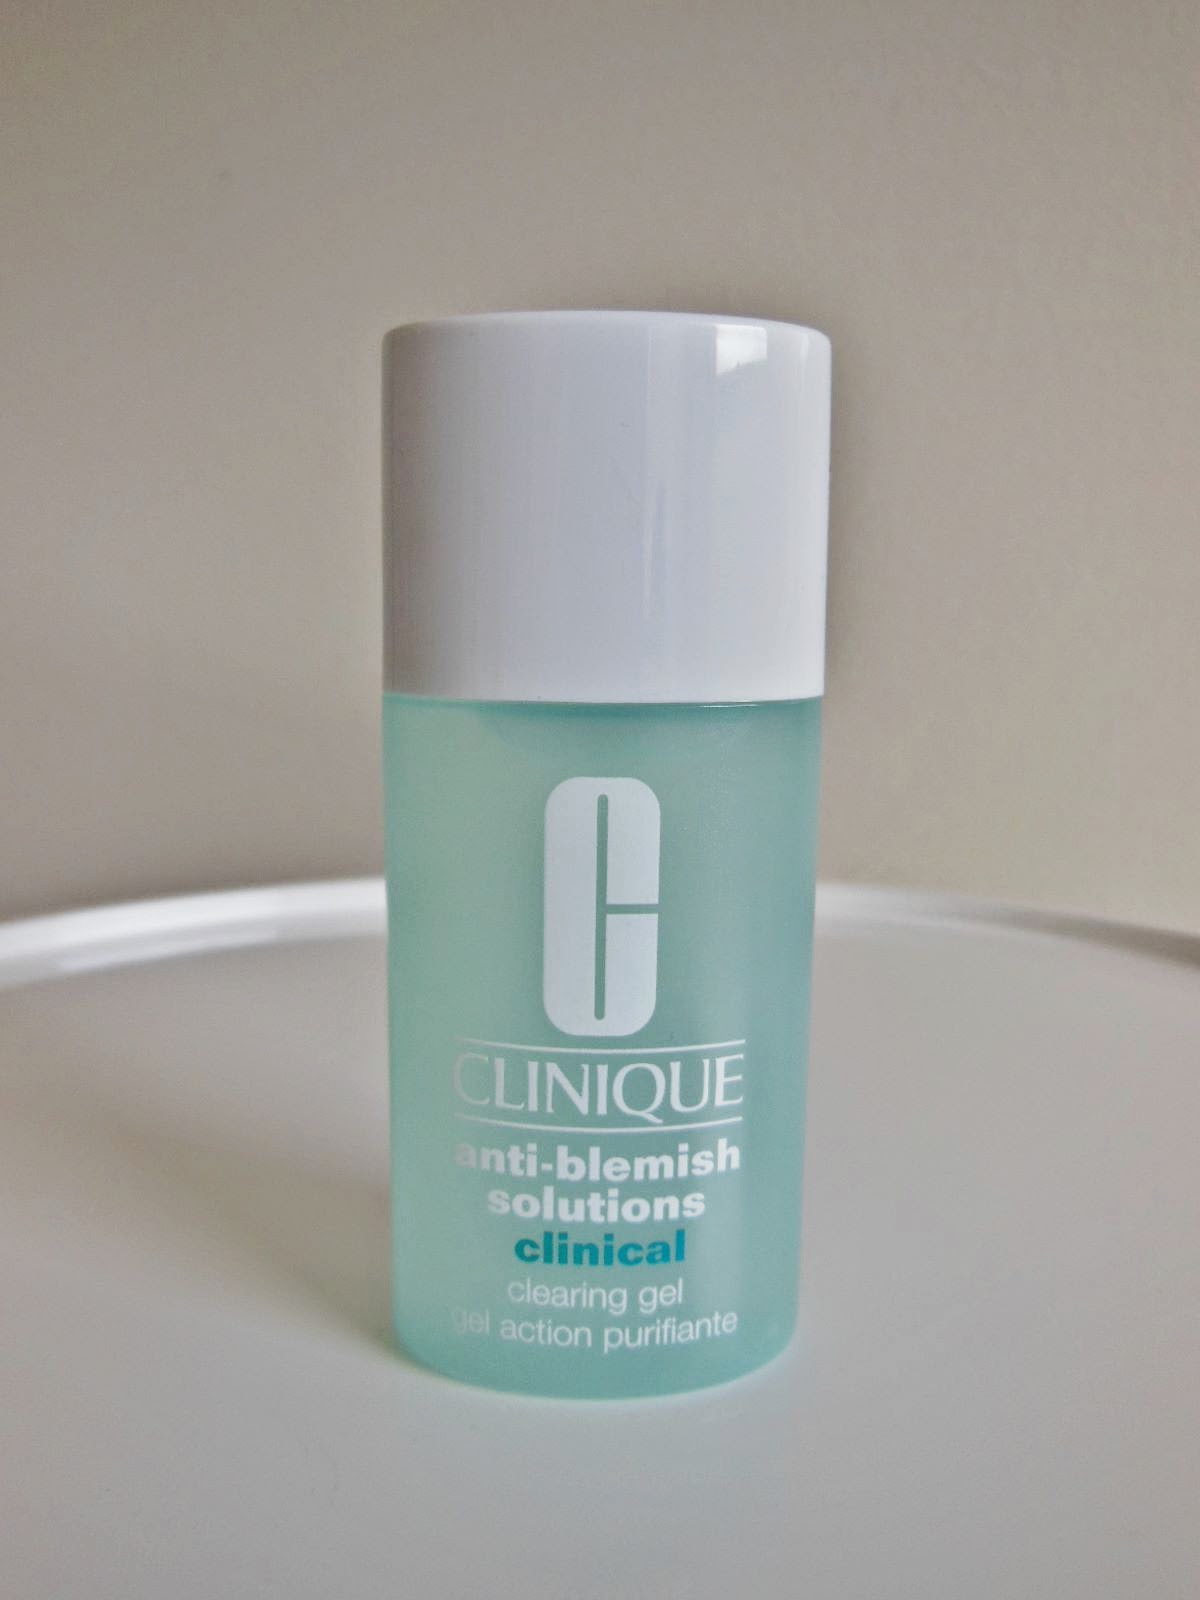 PRODUCT REVIEW: ANTI-BLEMISH SOLUTION CLINICAL CLEARING GEL | The Beauty & Hunter